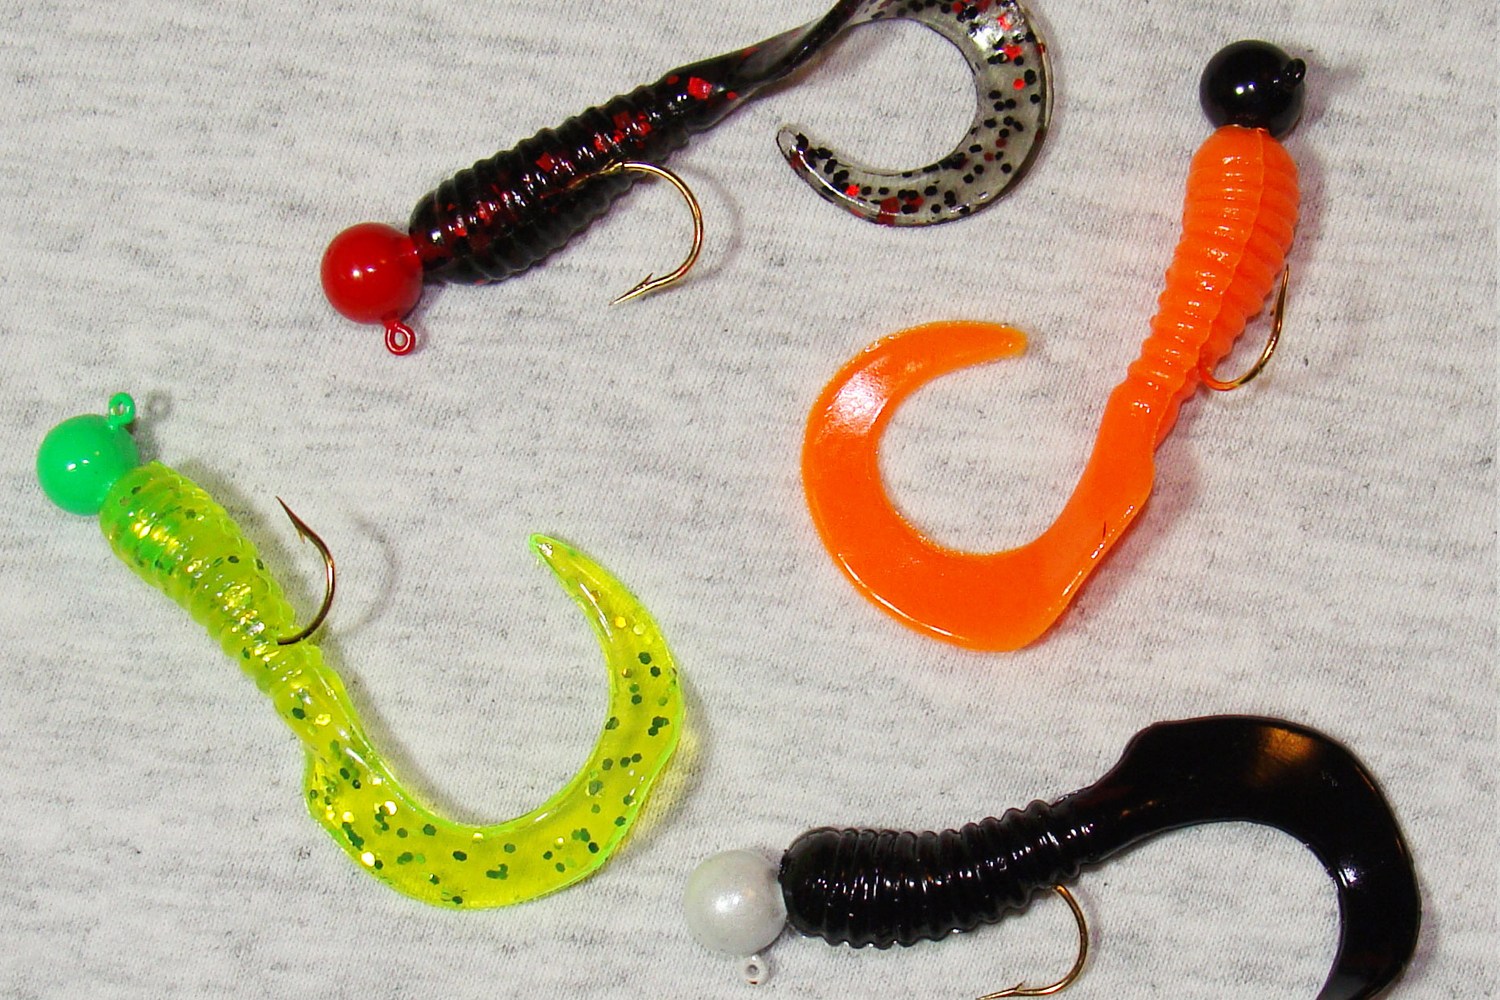 Ohio Saugeye Fishing Lures Cheapest Stores